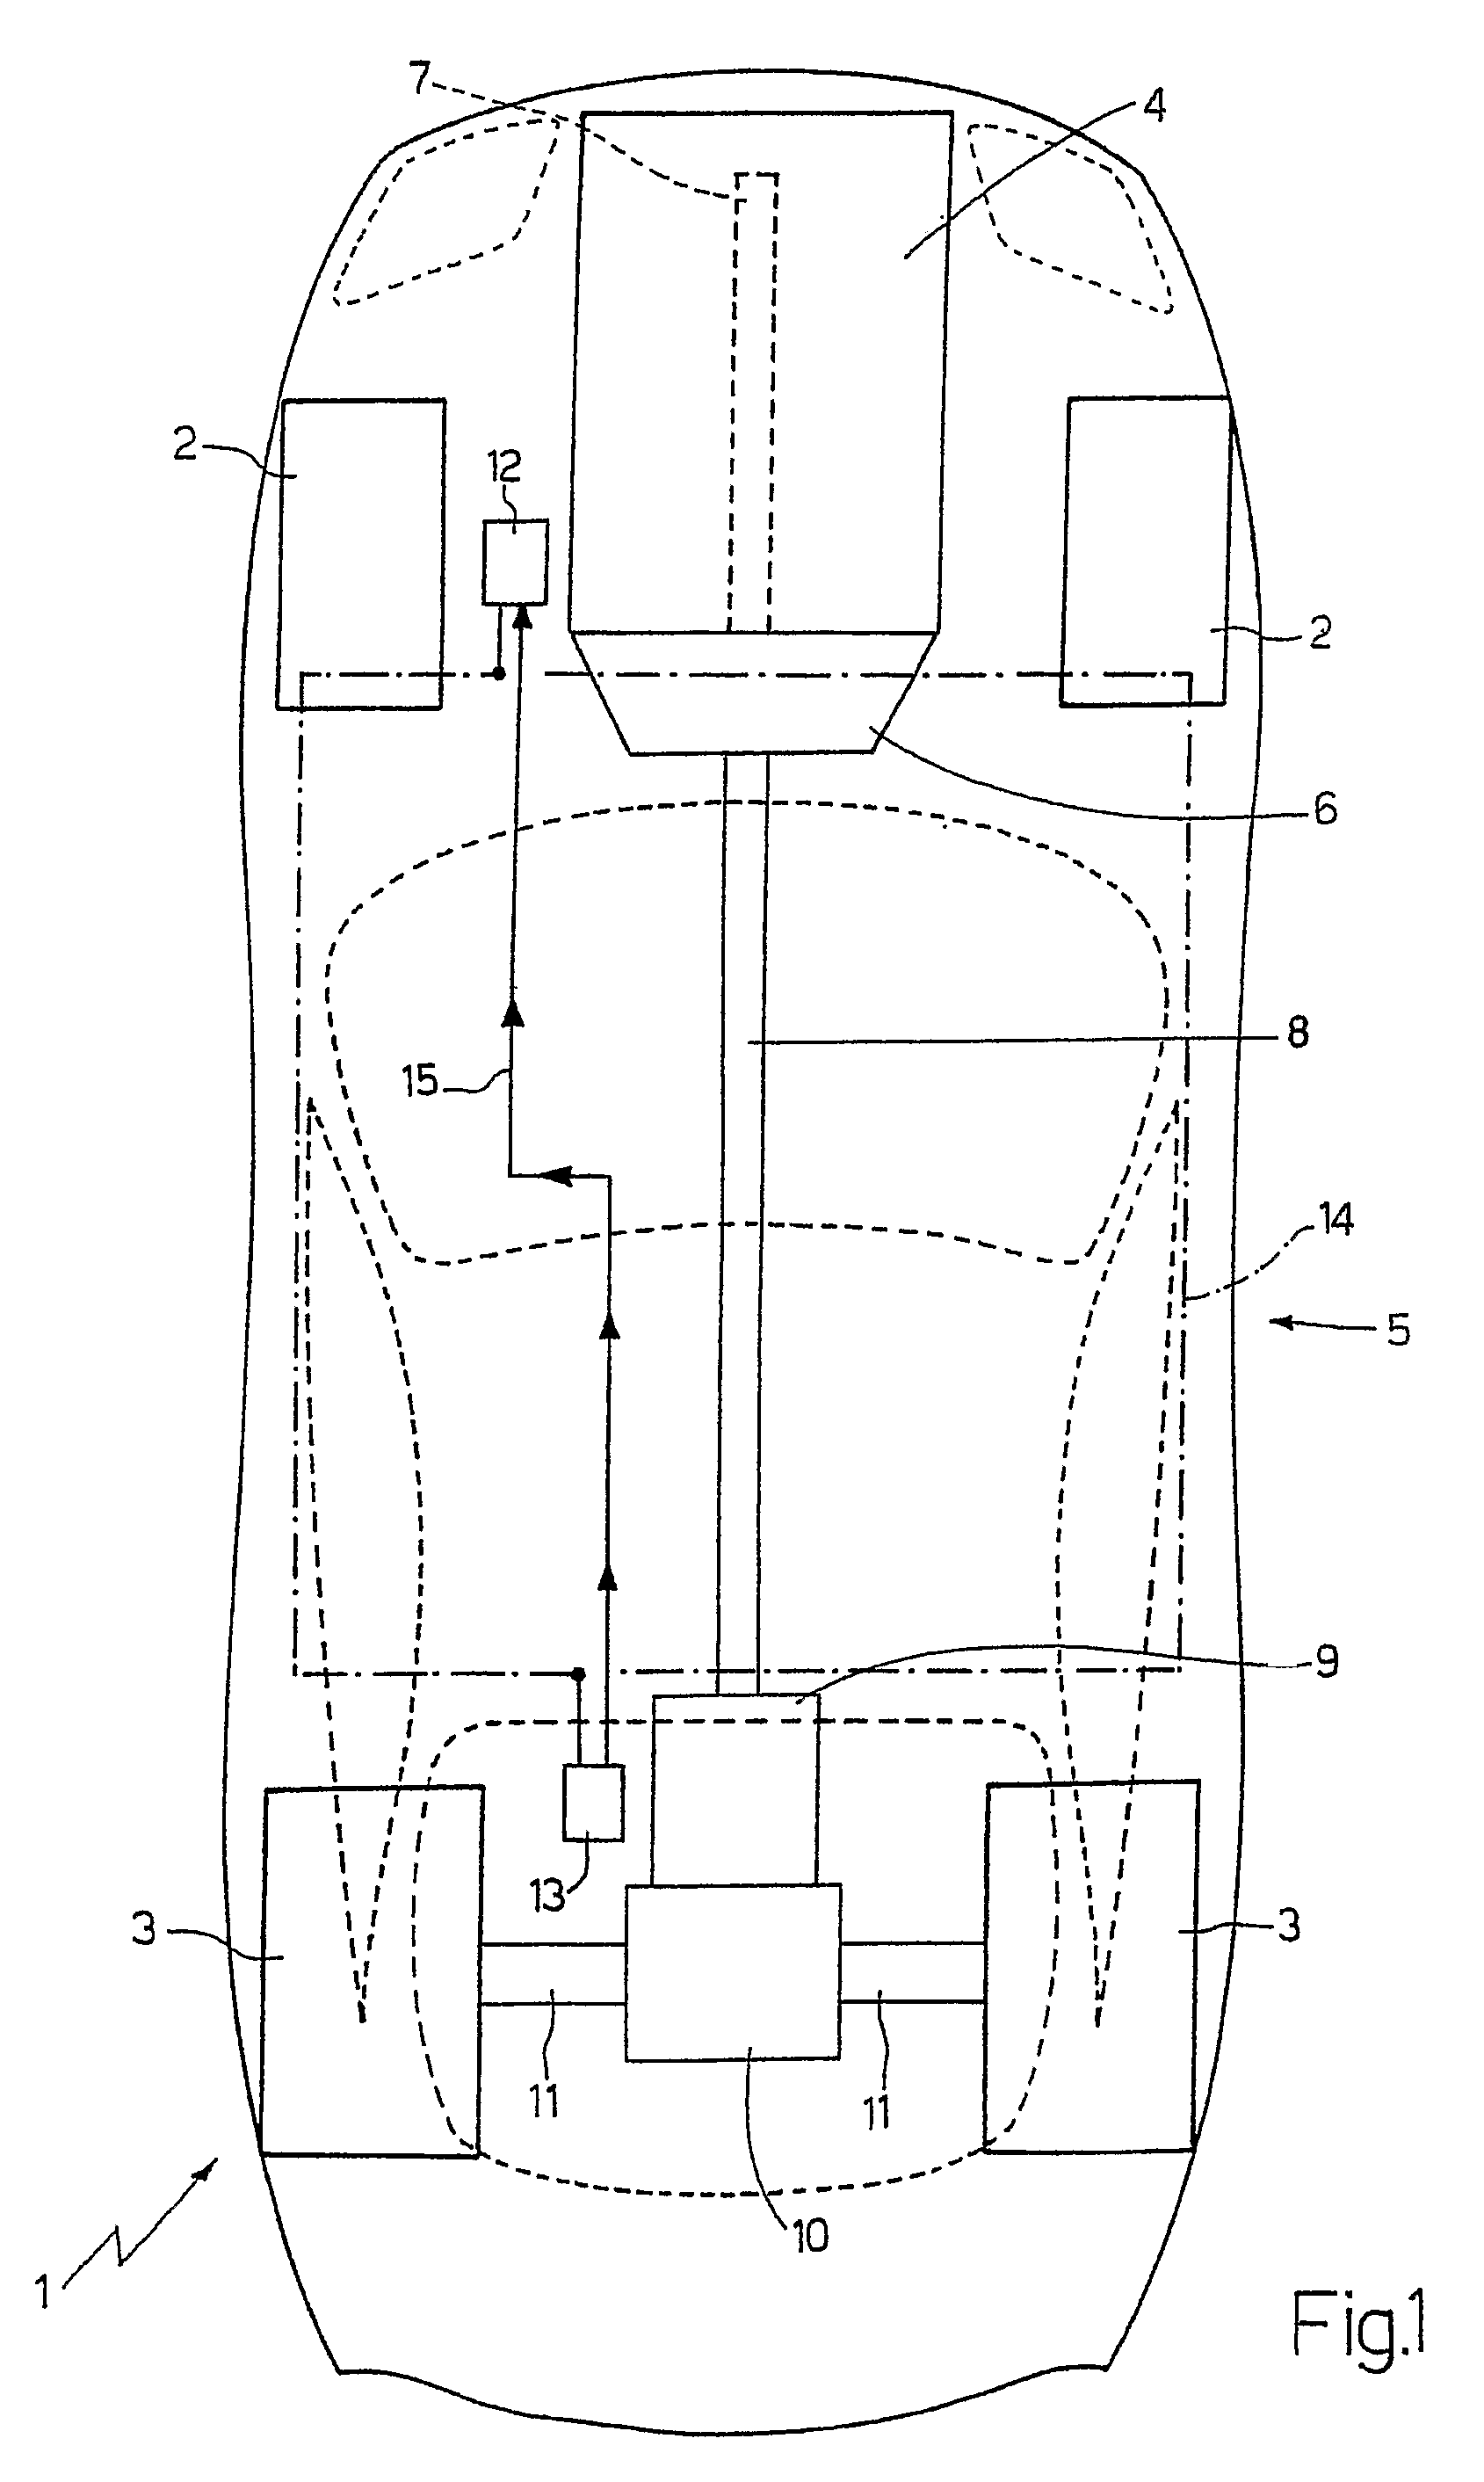 Method of gear-shifting in a servo-controlled manual gearbox